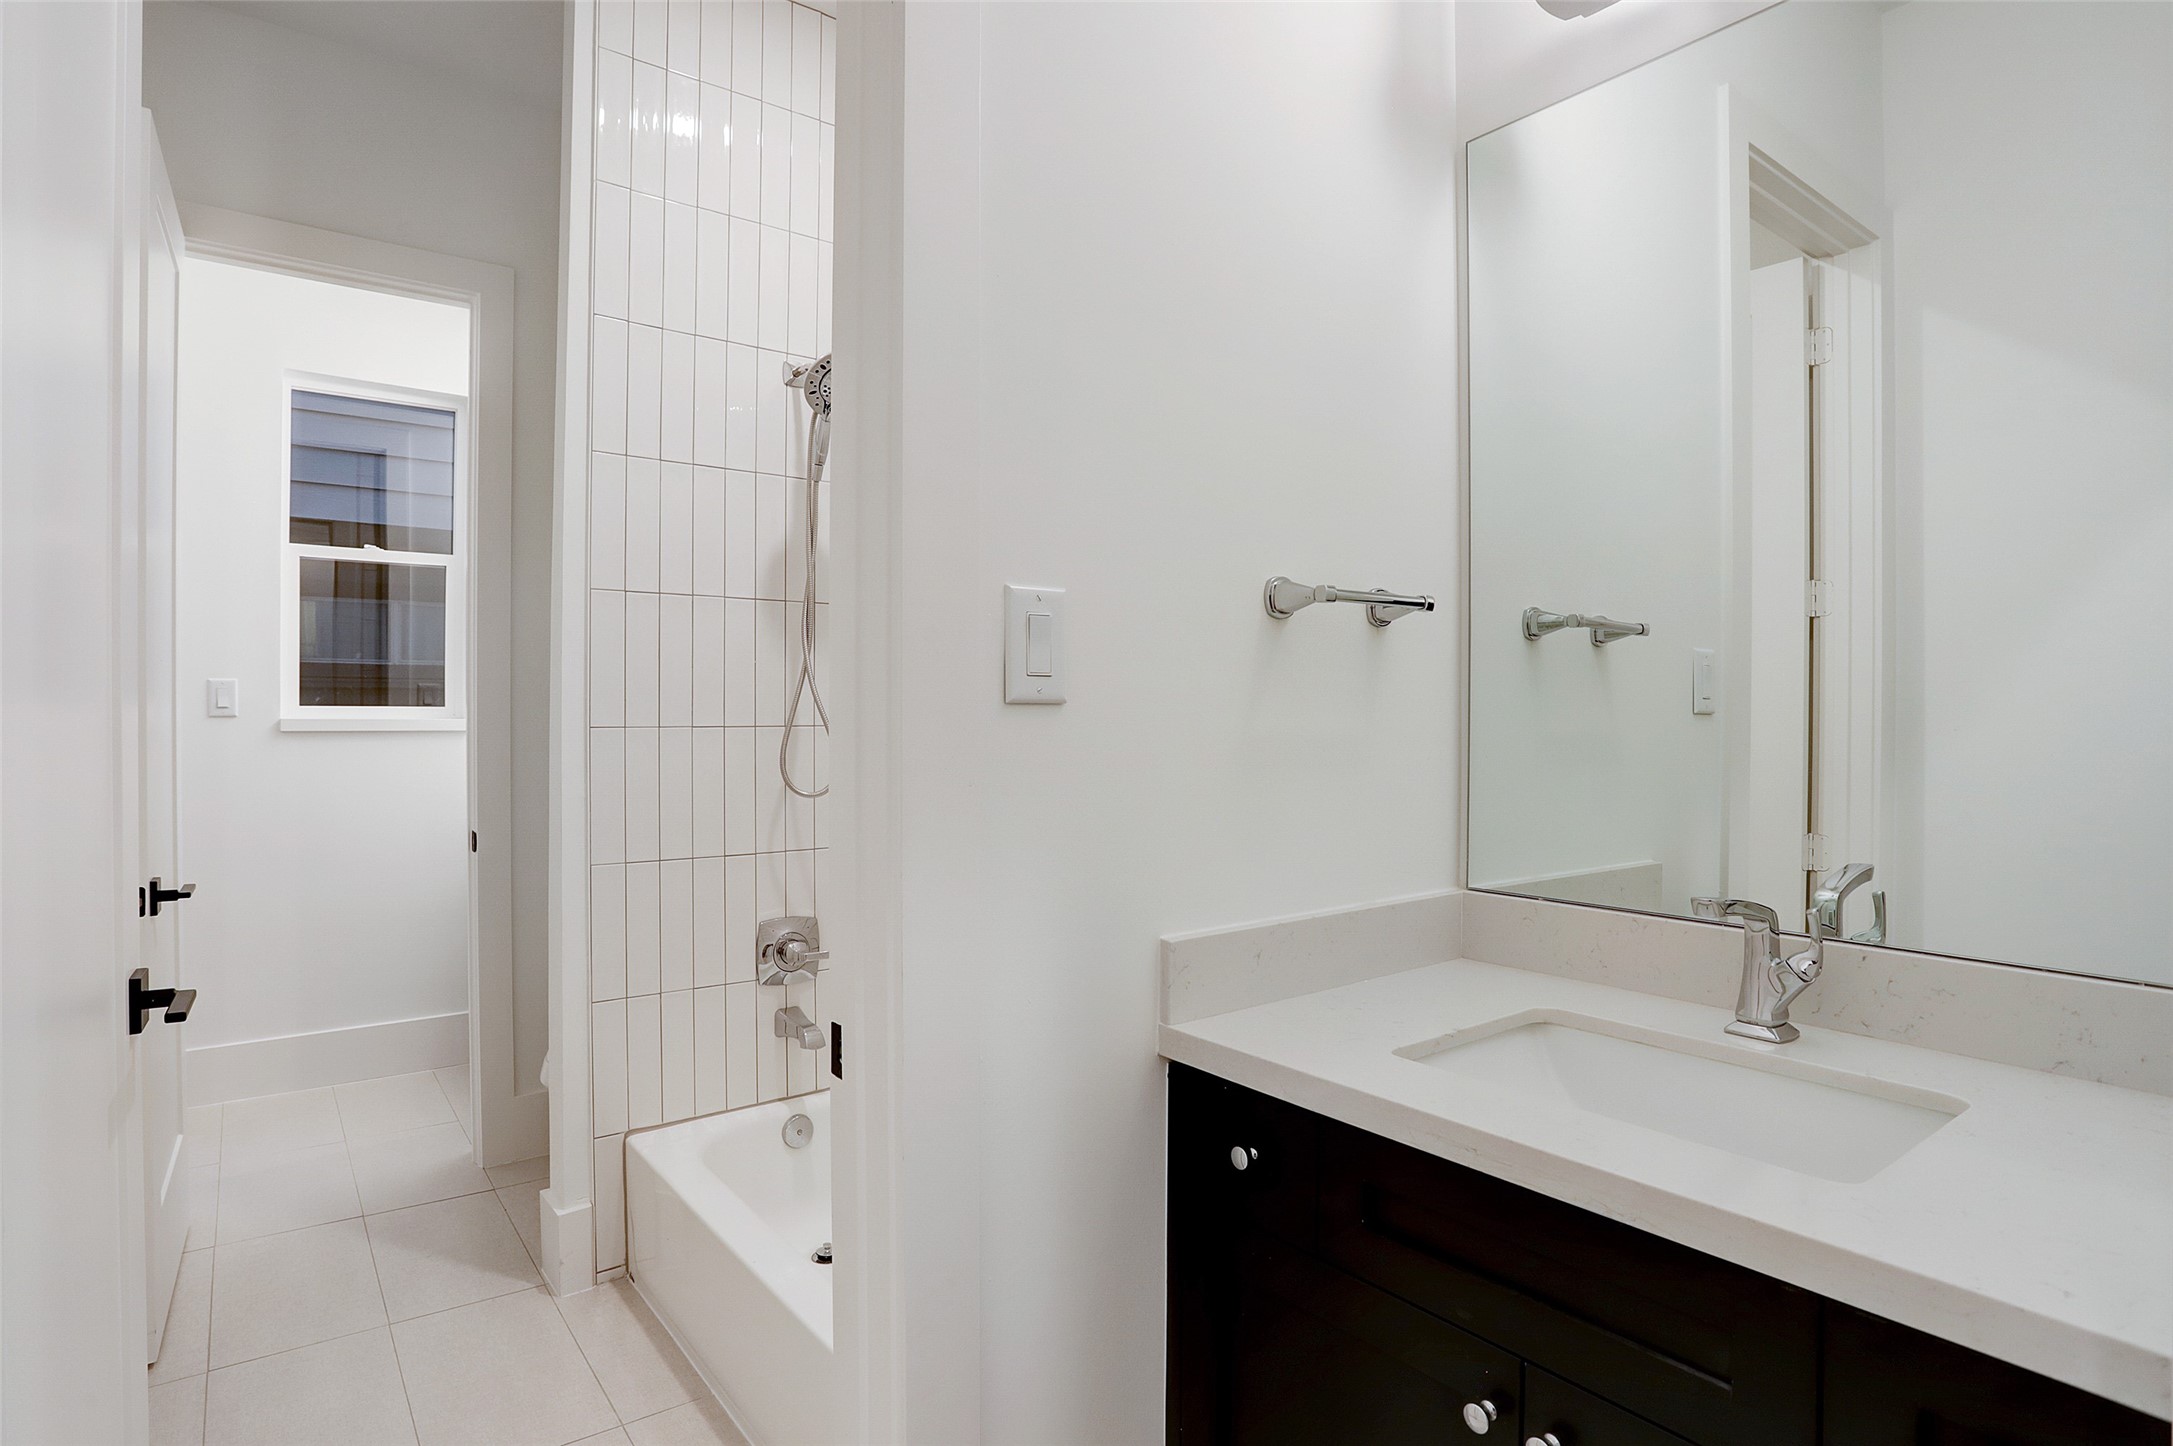 Bedrooms 2 and 3 share oversize Jack-and-Jill bathroom with each room having their own private vanity area.